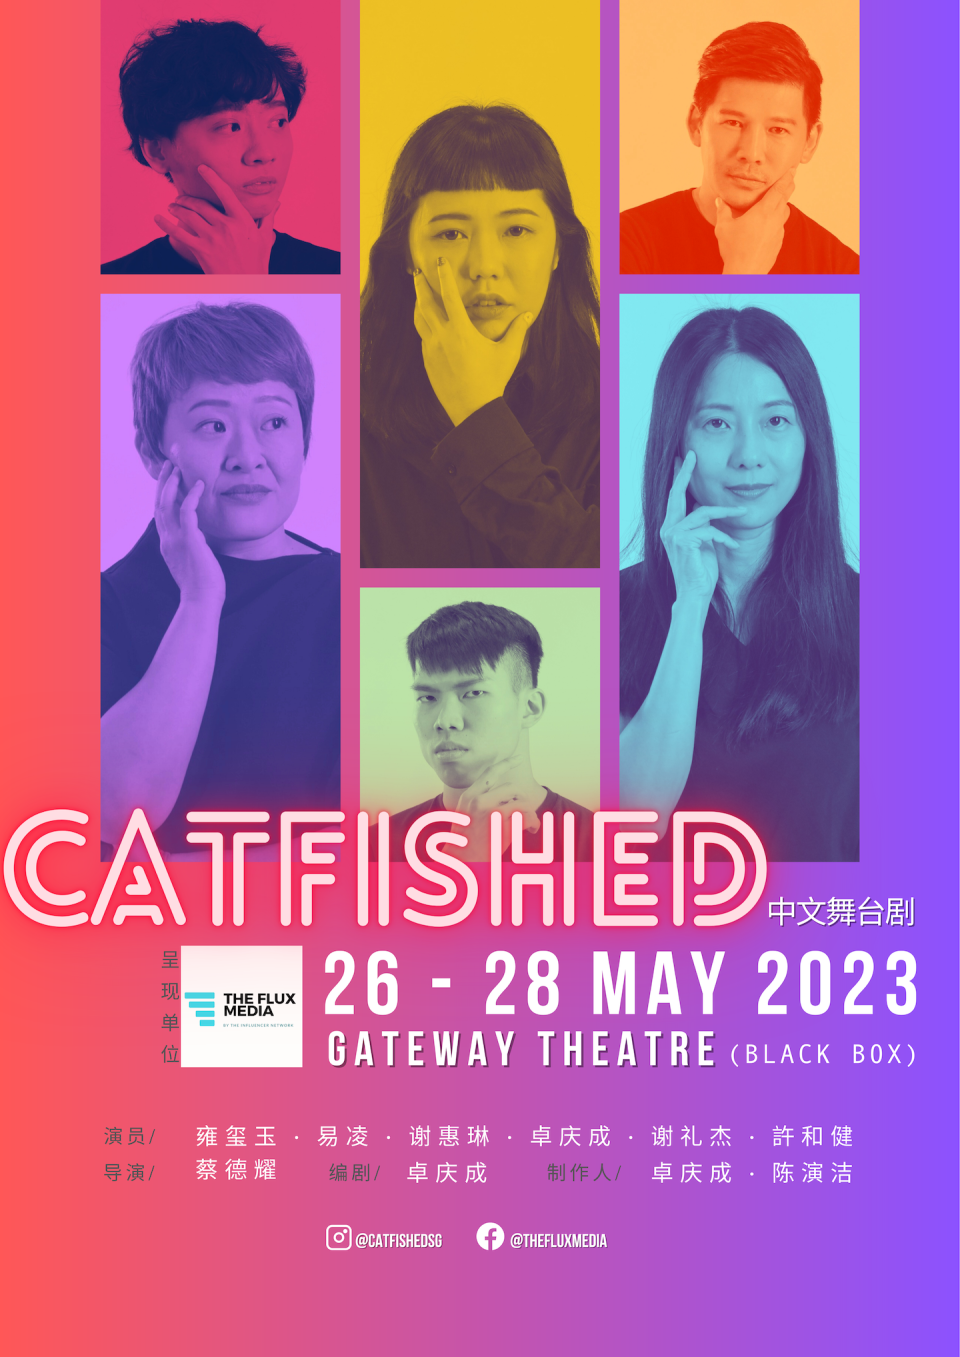 Poster of Catfished play (Photo: The FLUX Media)